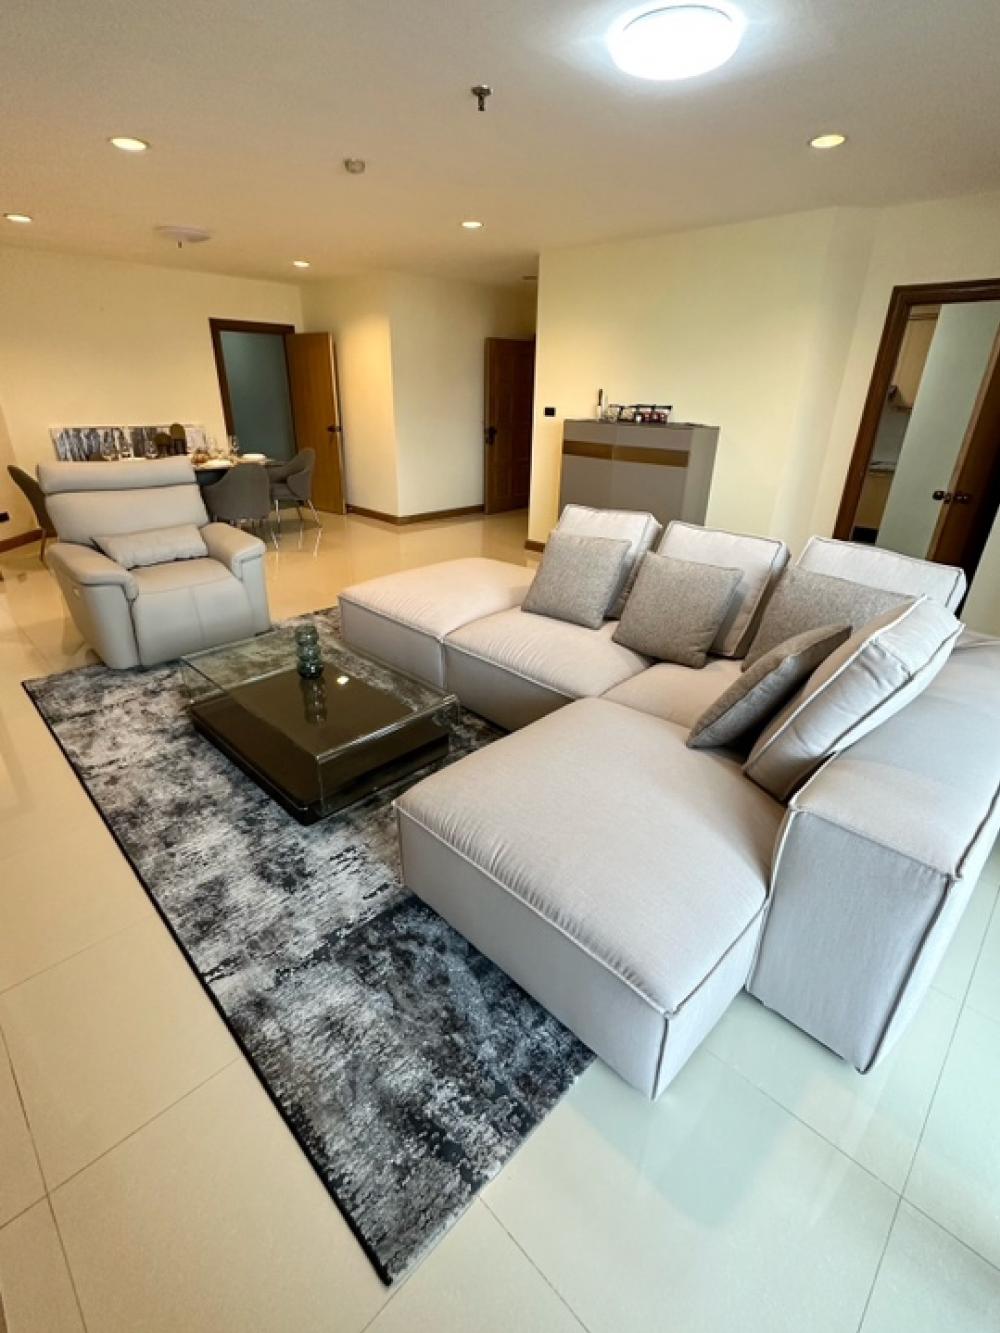 For RentCondoSukhumvit, Asoke, Thonglor : (Ready to move in) Condo for rent, 3 bedrooms, 2 bathrooms, 55th Tower Thonglor, 164.85 sq m., 5 minutes walk from BTS Thonglor, 7th floor, Thonglor Road view. Fully furnished